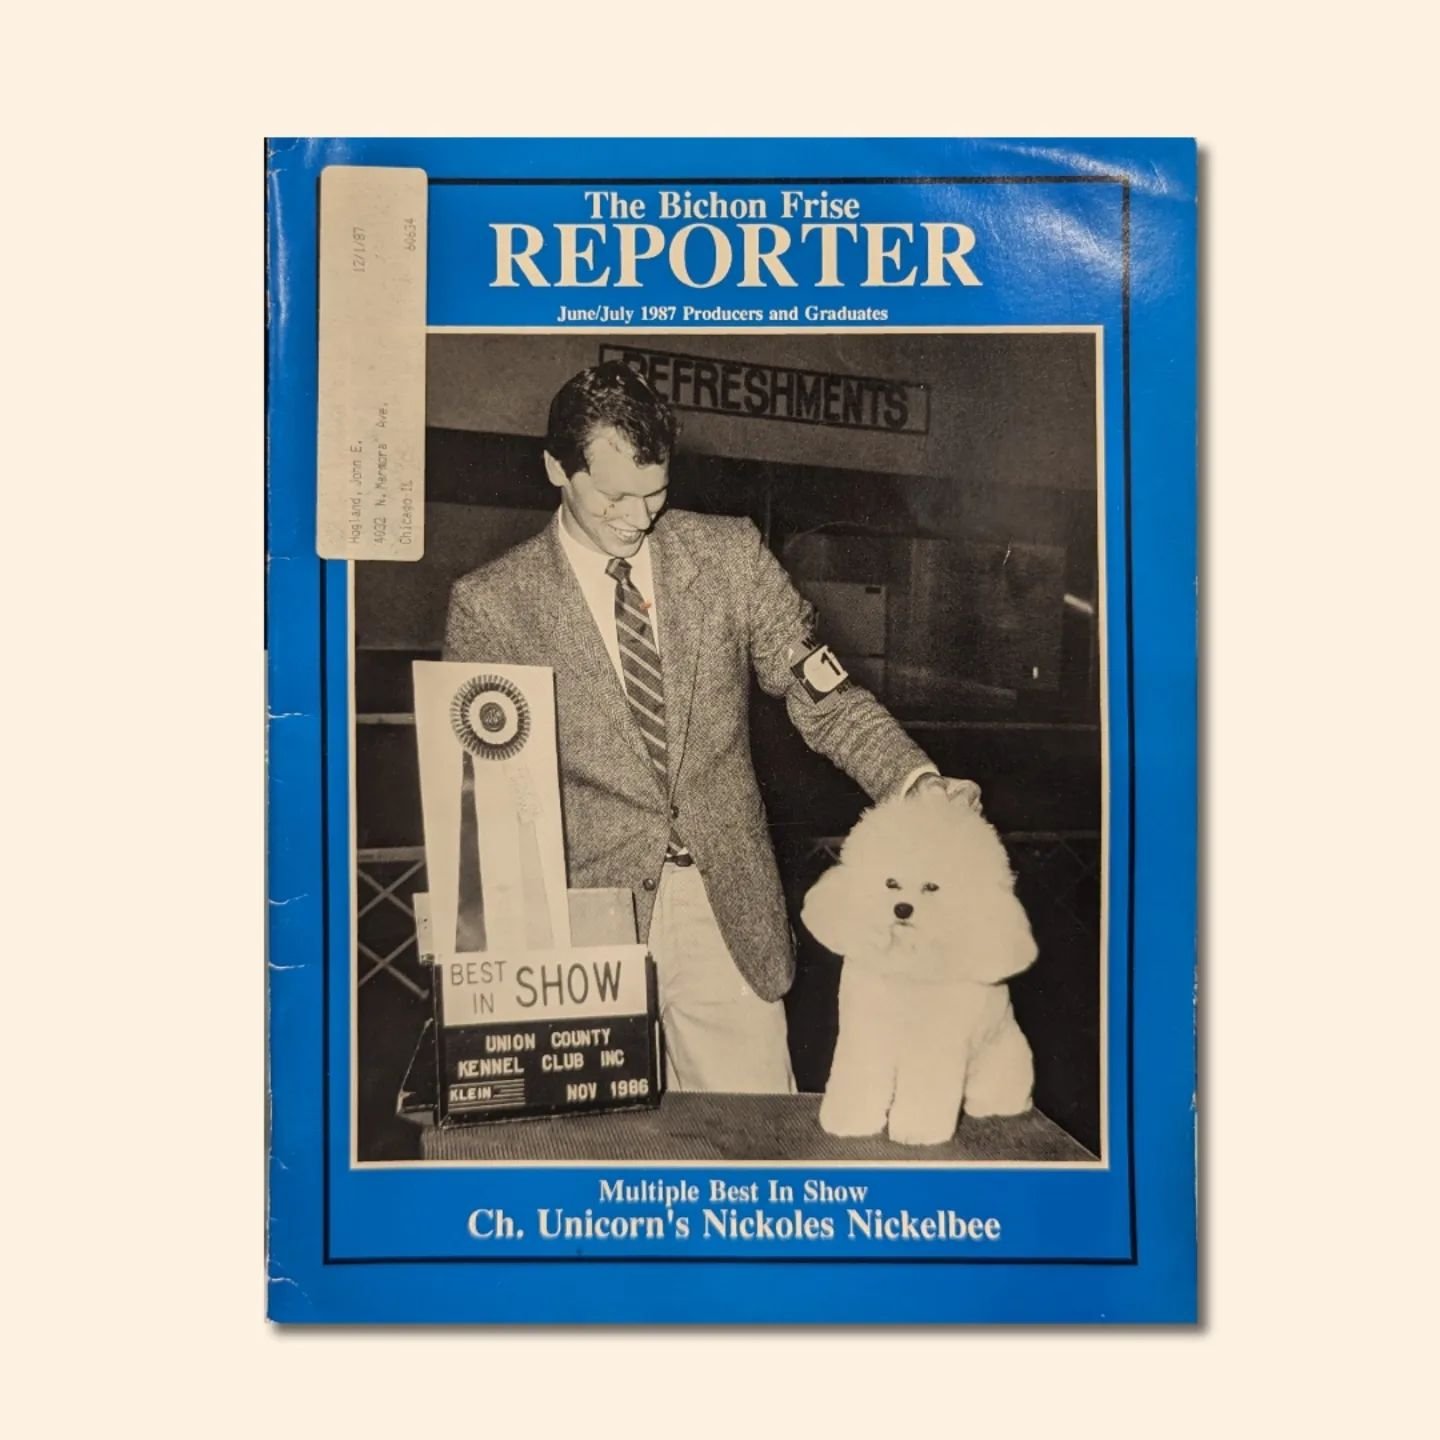 The Bichon Frise Reporter - Three classic 1980's issues of the beloved American Publication dedicated solely to the promotion and betterment of the Bichon Frise